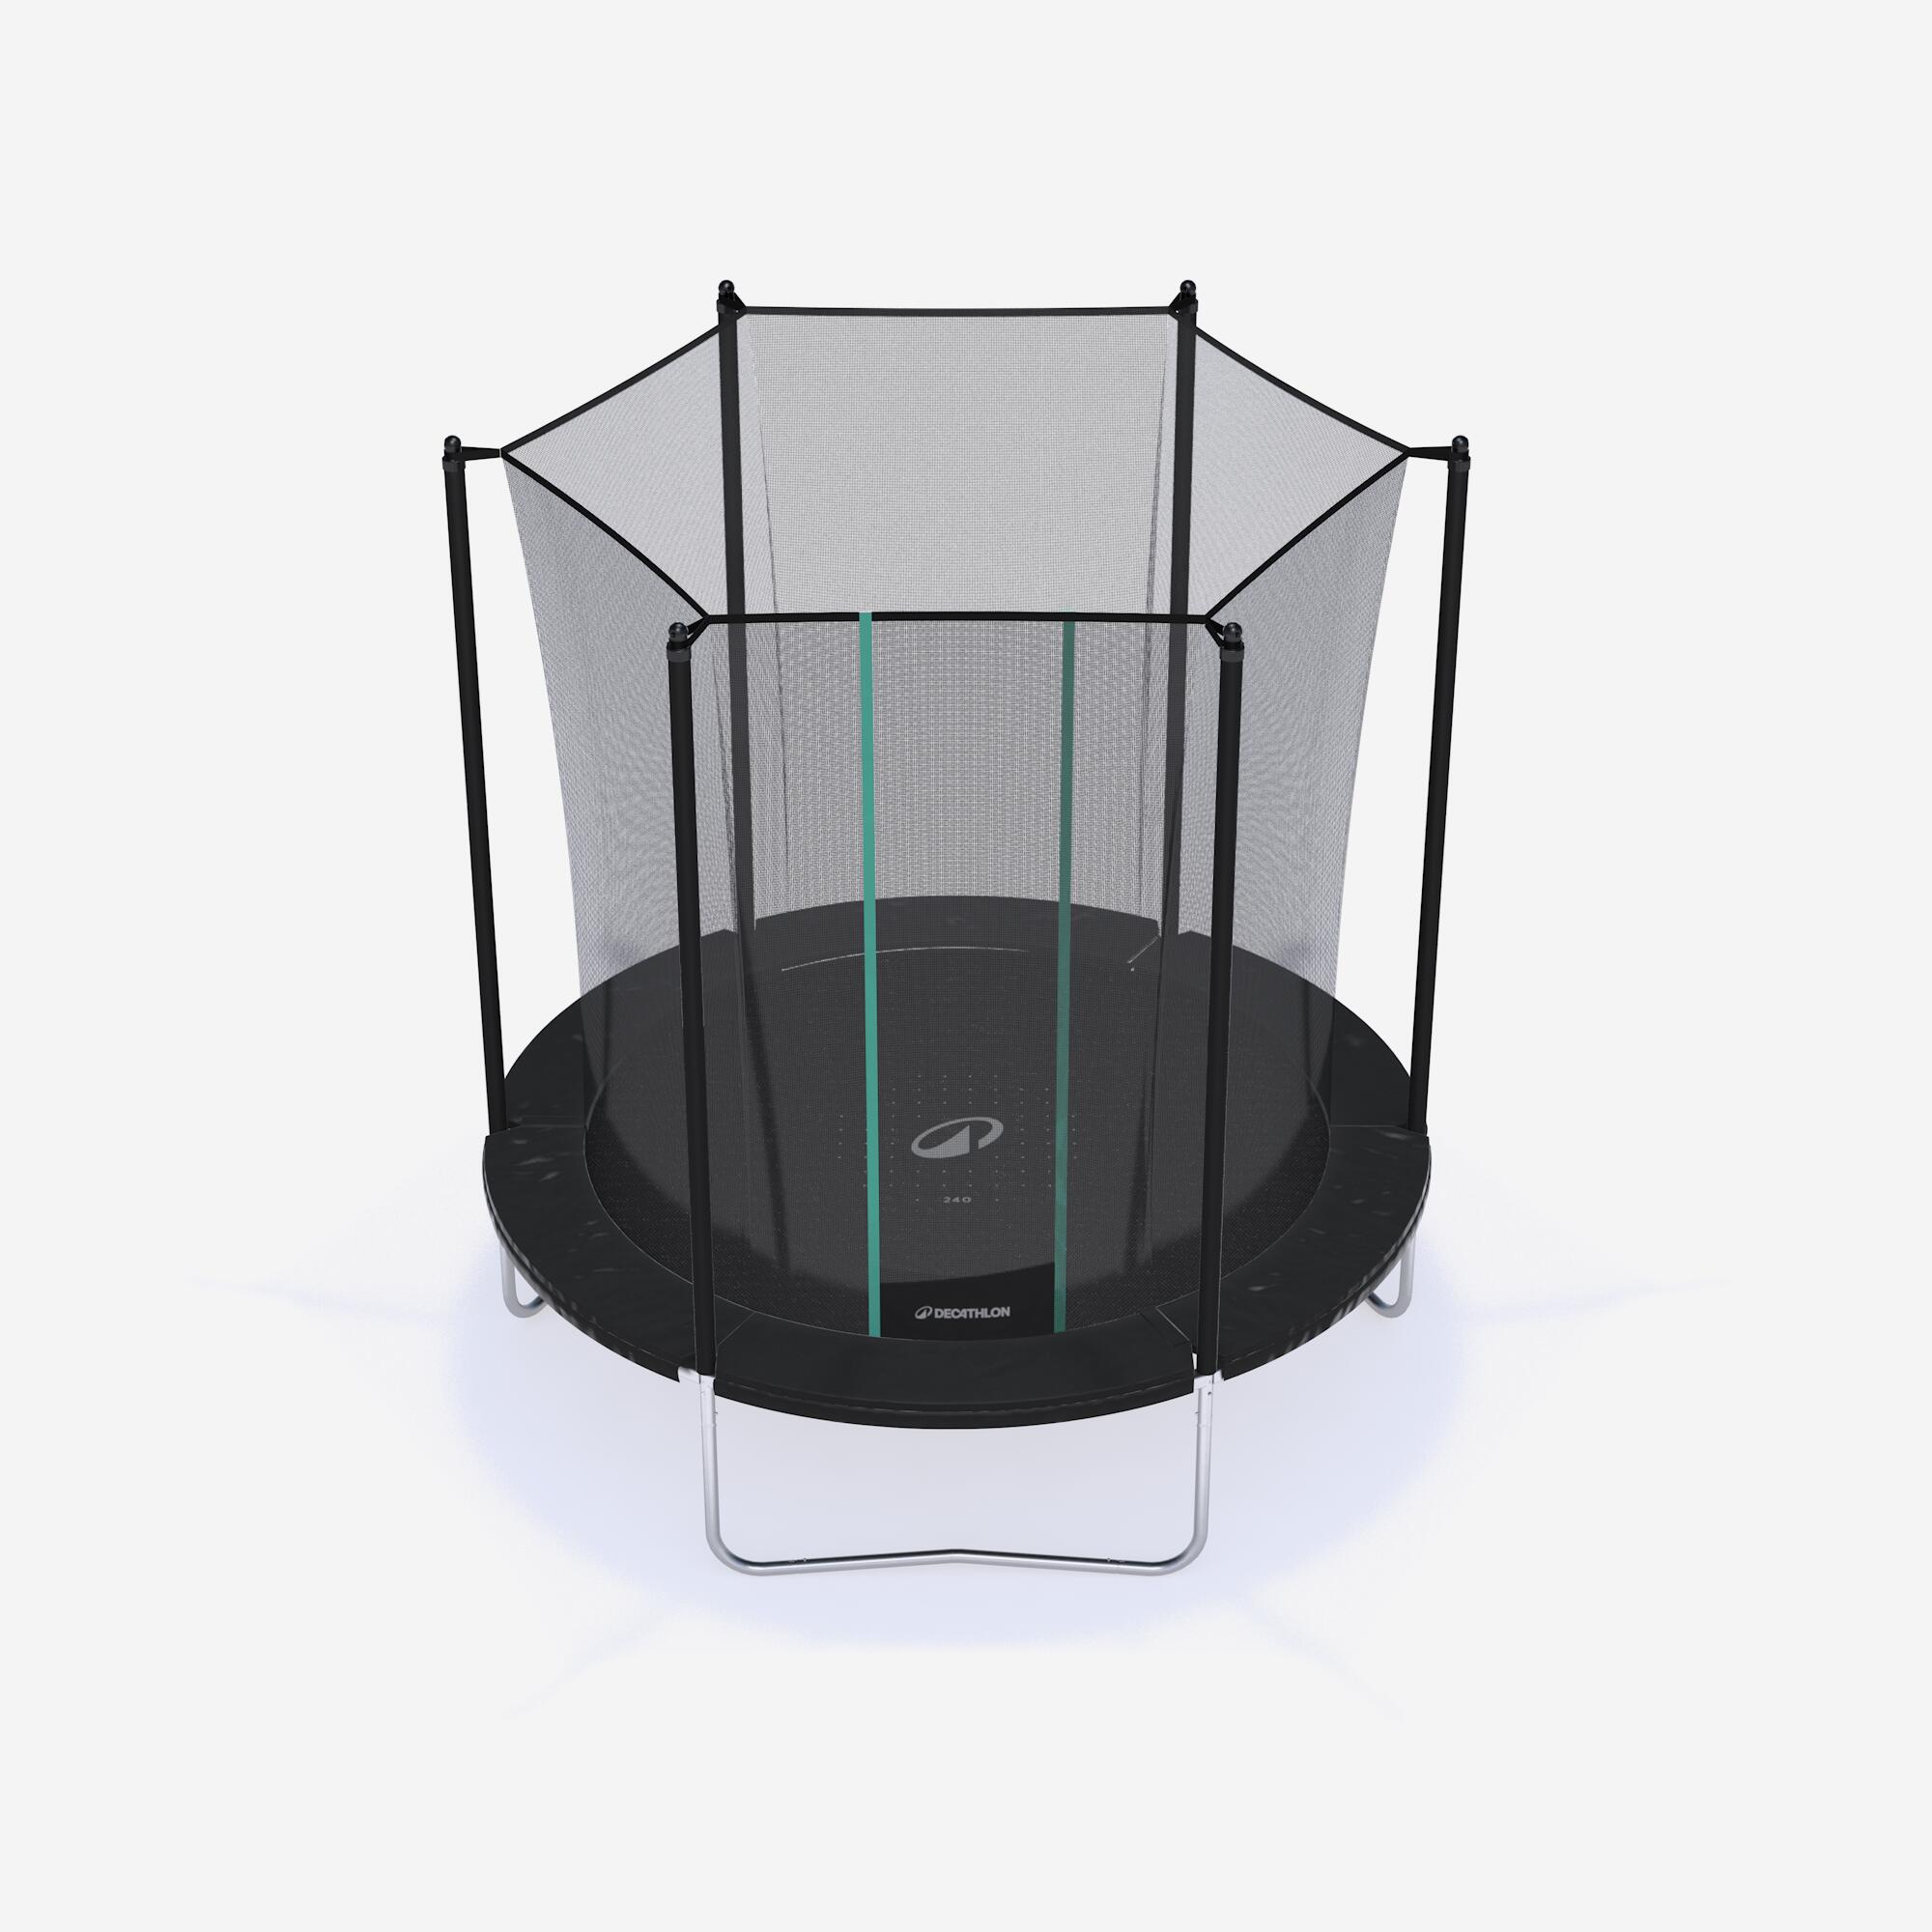 DOMYOS Trampoline 240 with Protective Net - Tool-Free Design